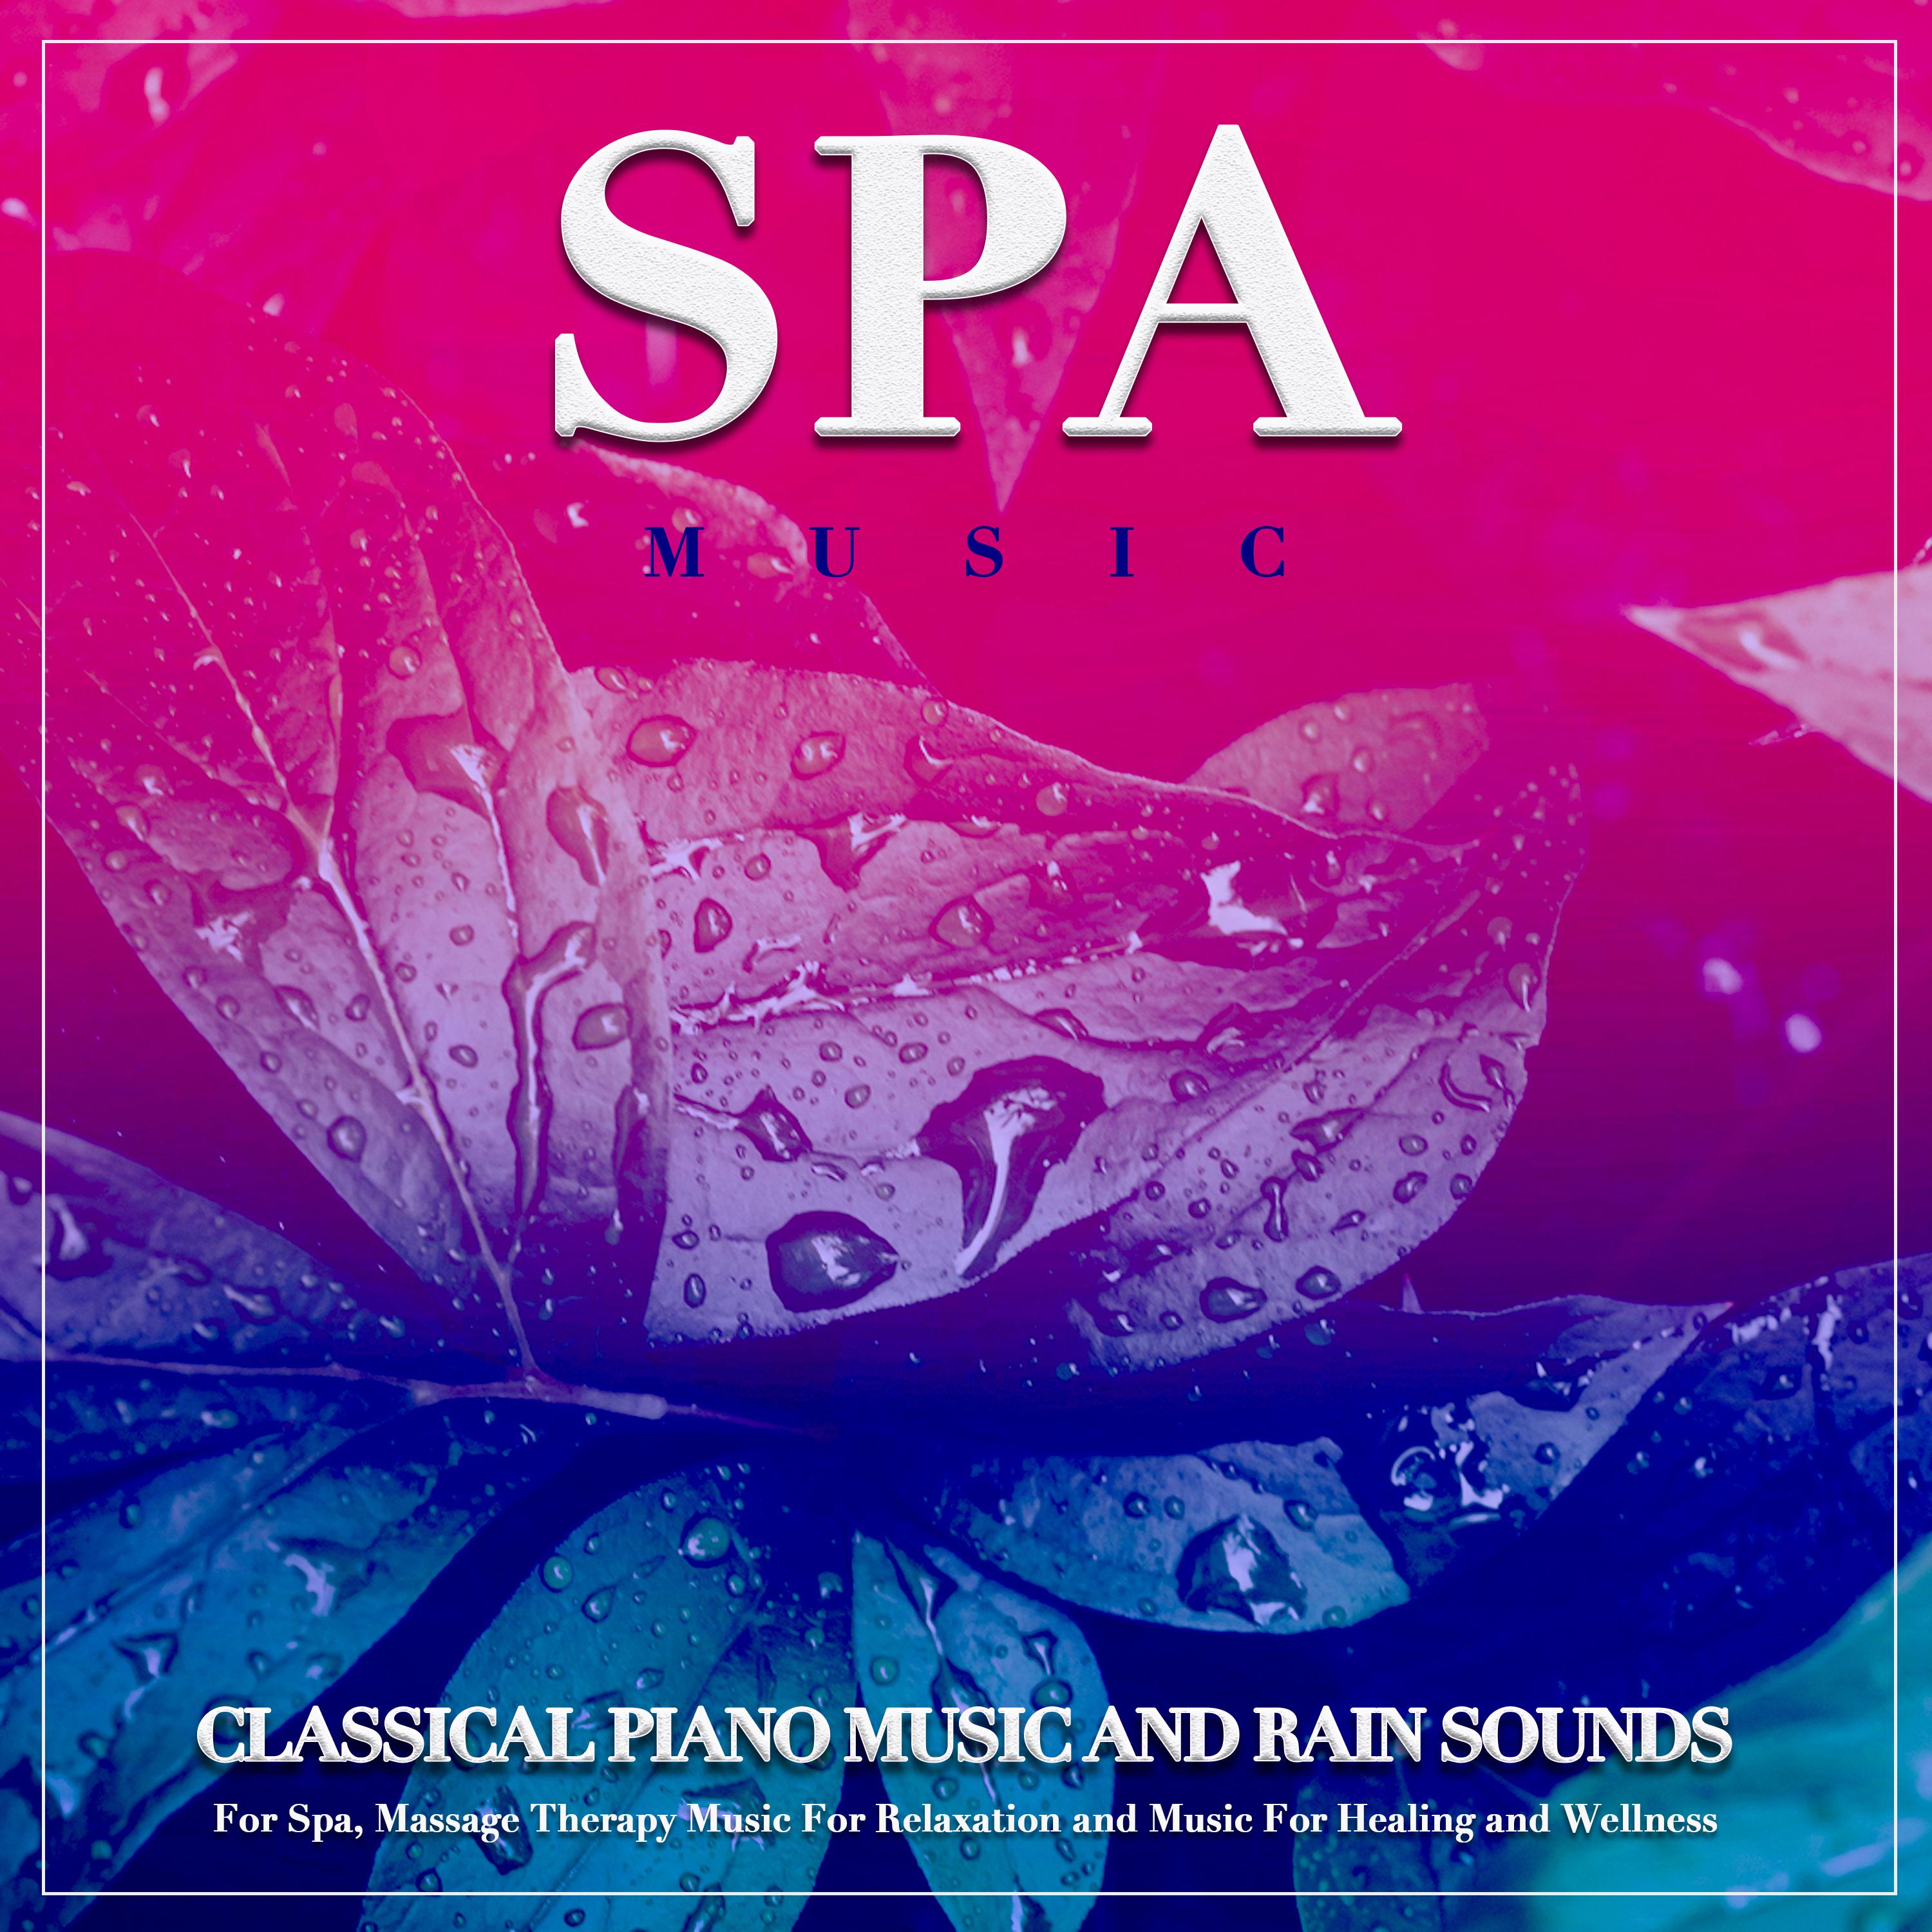 Nocturne - Chopin - Classical Piano and Rain Sounds - Spa Music